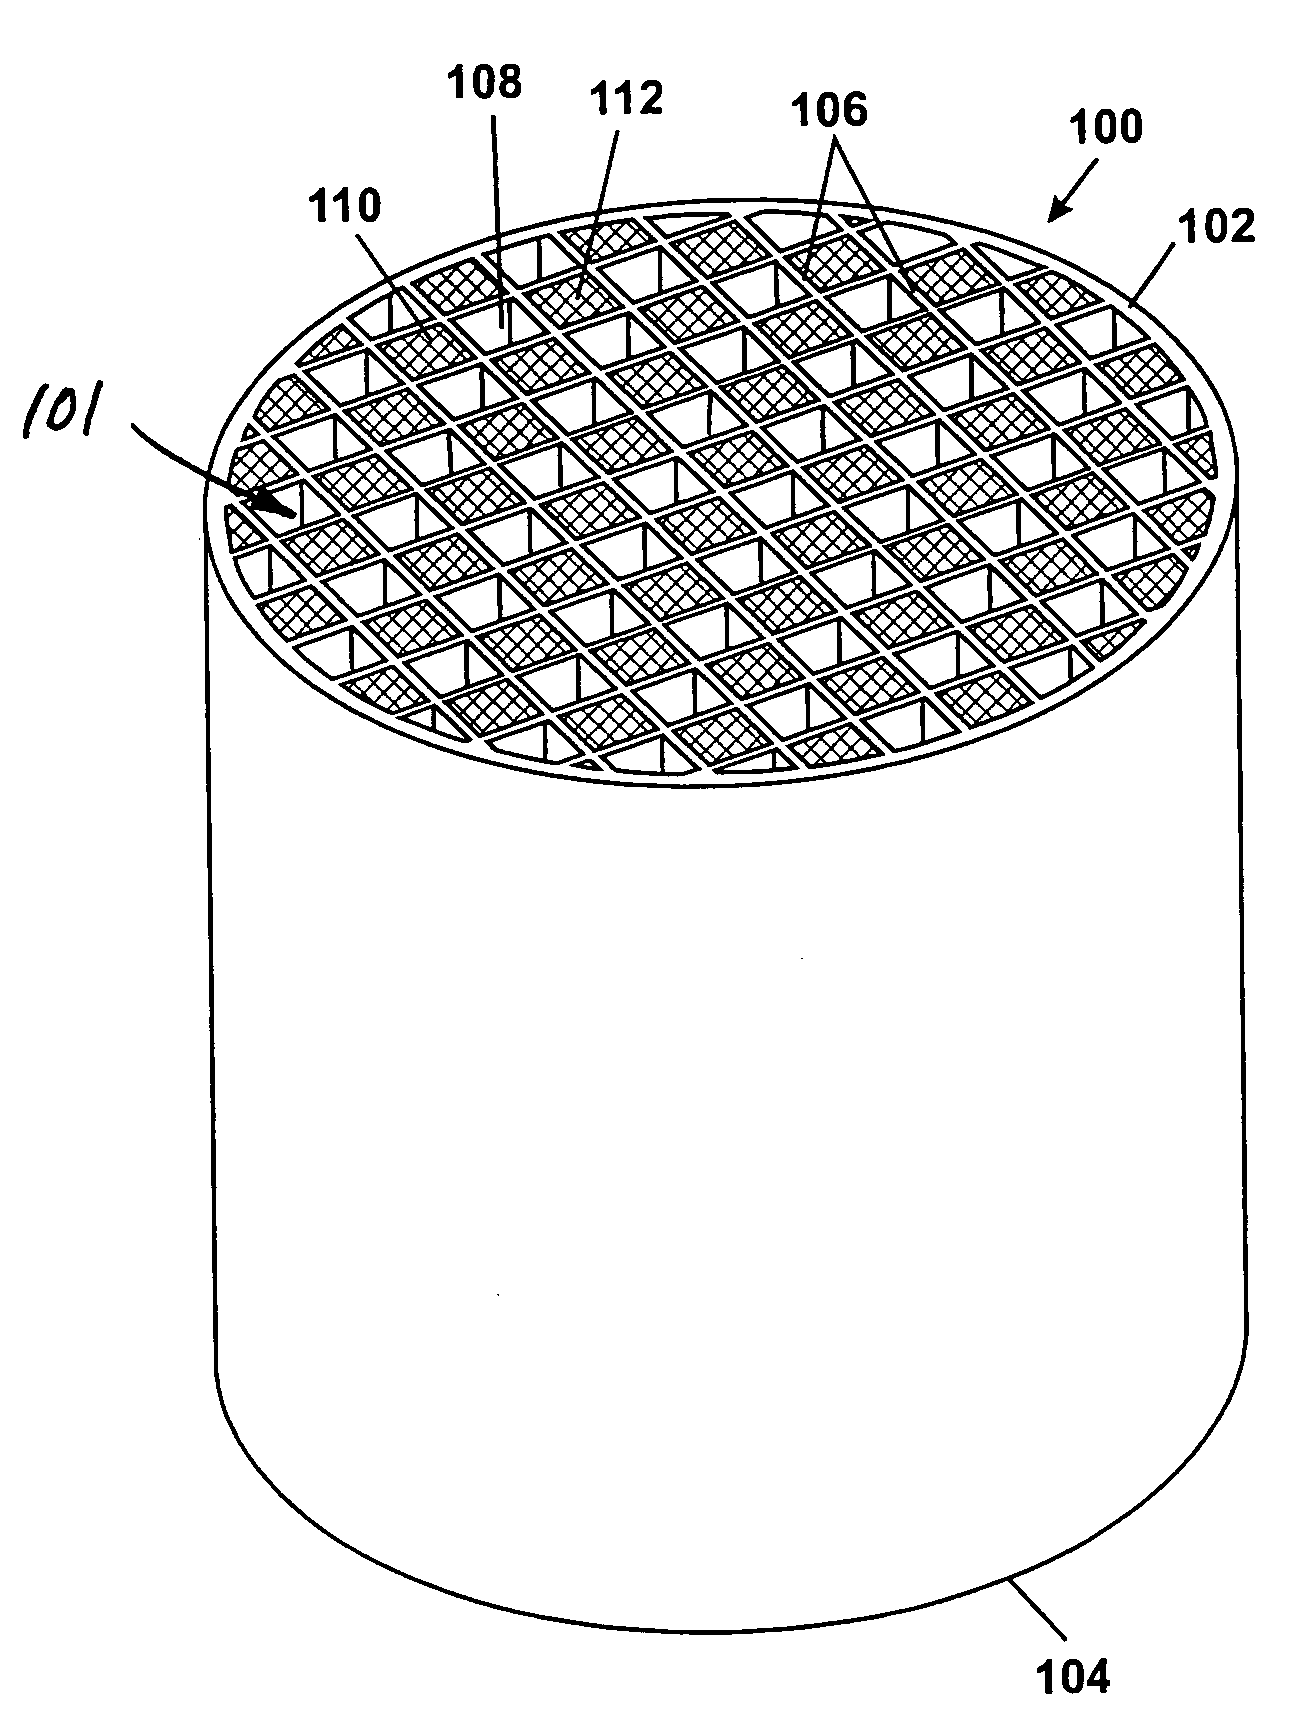 Porous cordierite ceramic honeycomb article with improved strength and method of manufacturing same